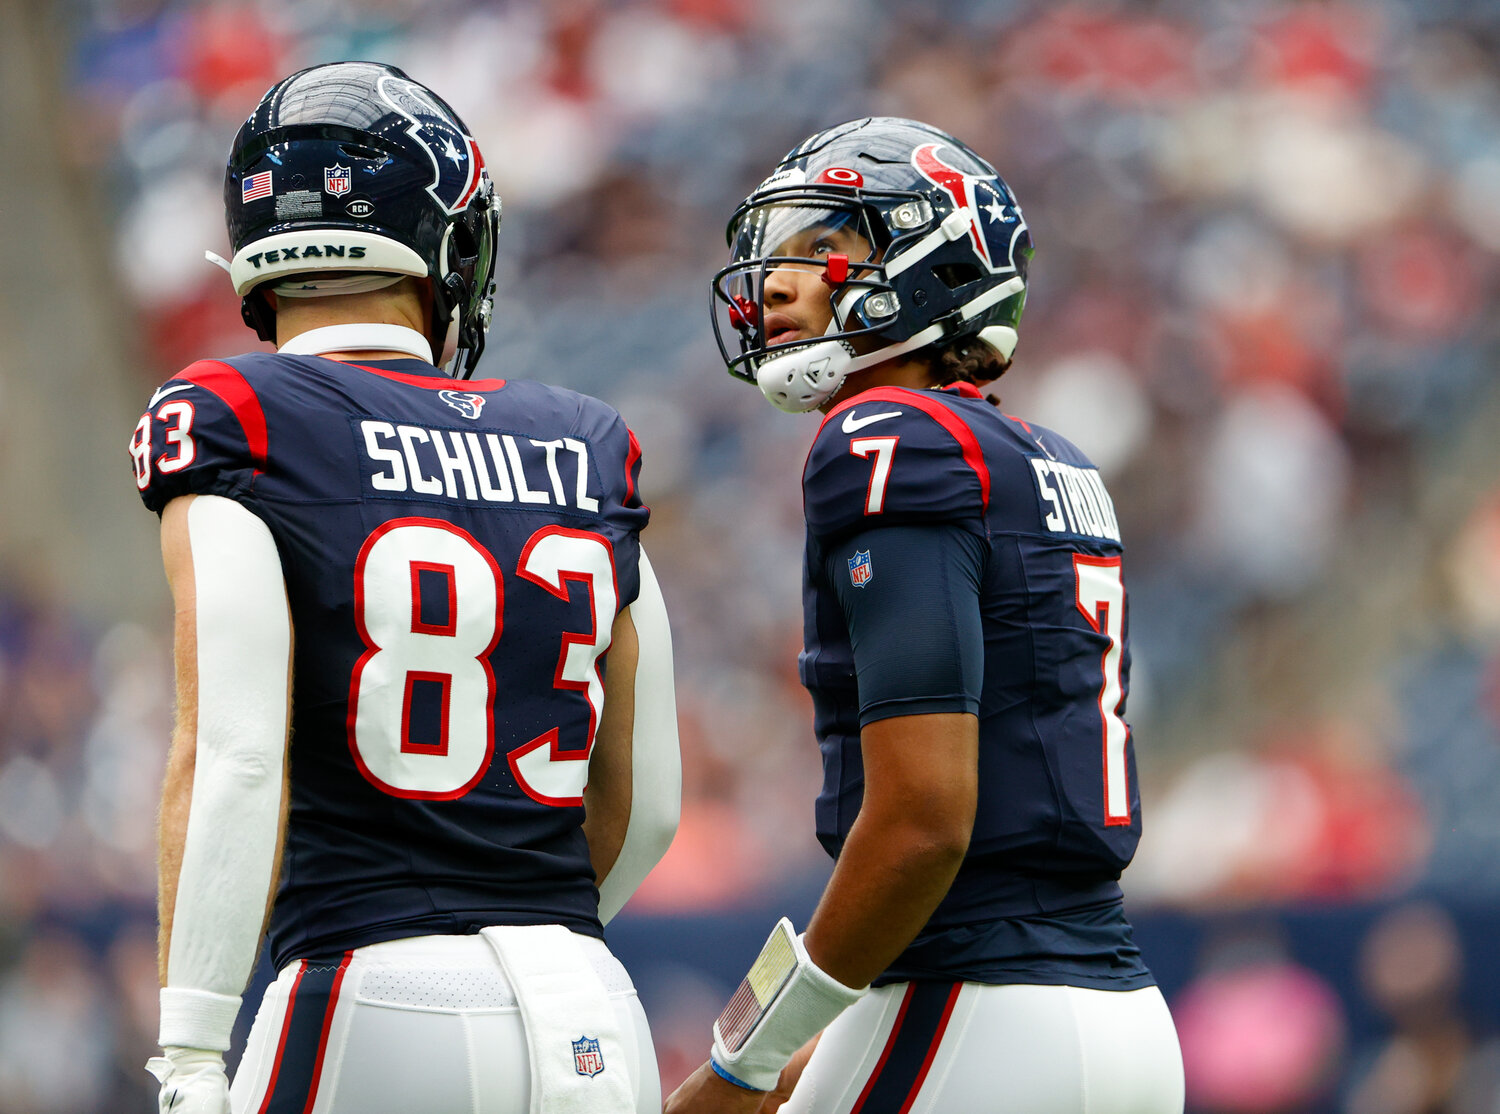 Houston Texans quarterback C.J. Stroud (7) looks up at the video board while talking to tight end Dalton Schultz (83) after an unsuccessful third down attempt during an NFL preseason game between the Texans and the Dolphins Jaguars on August 19, 2023 in Houston.